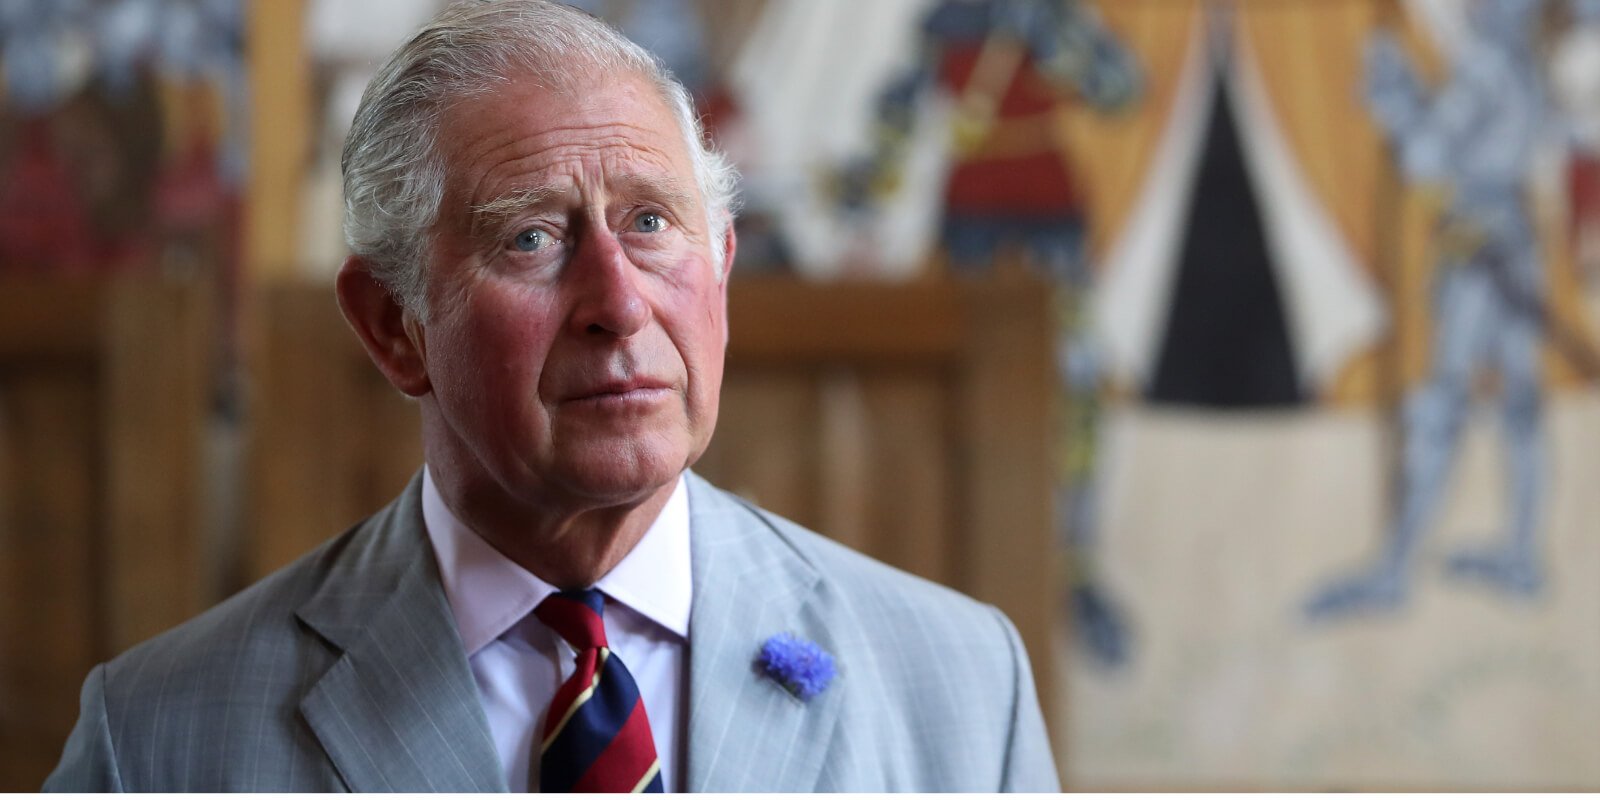 King Charles III visits Tretower Court on July 5, 2018 in Crickhowell, Wales.